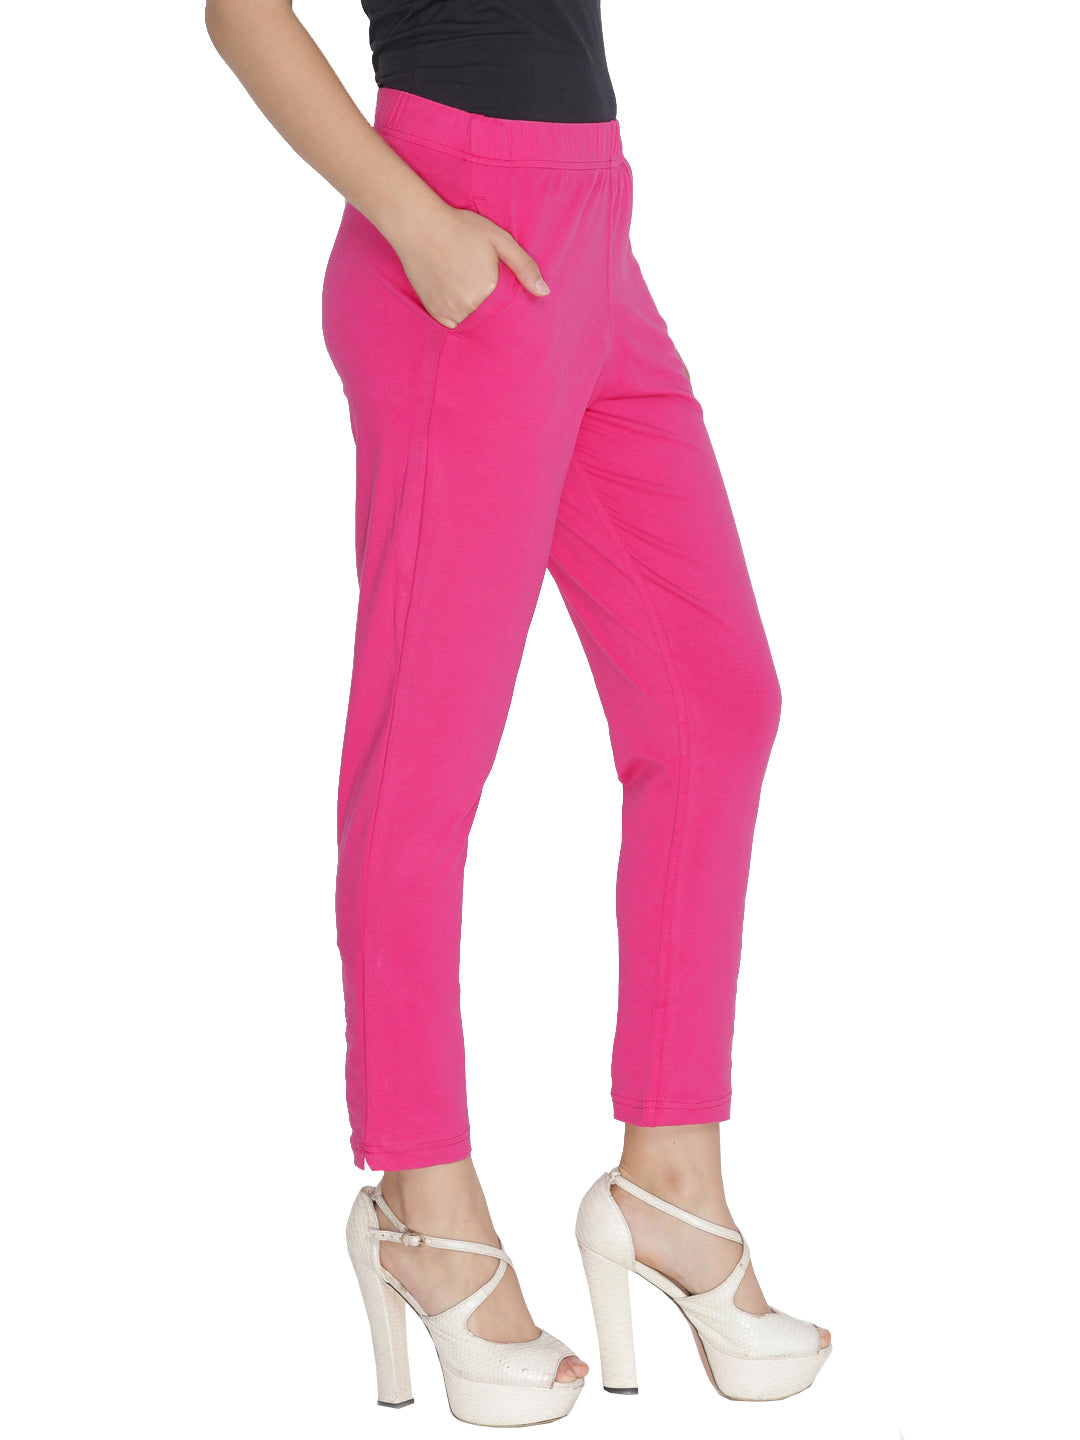 Self embroided cotton straight pants in hot pink colour - KanisaCrafts